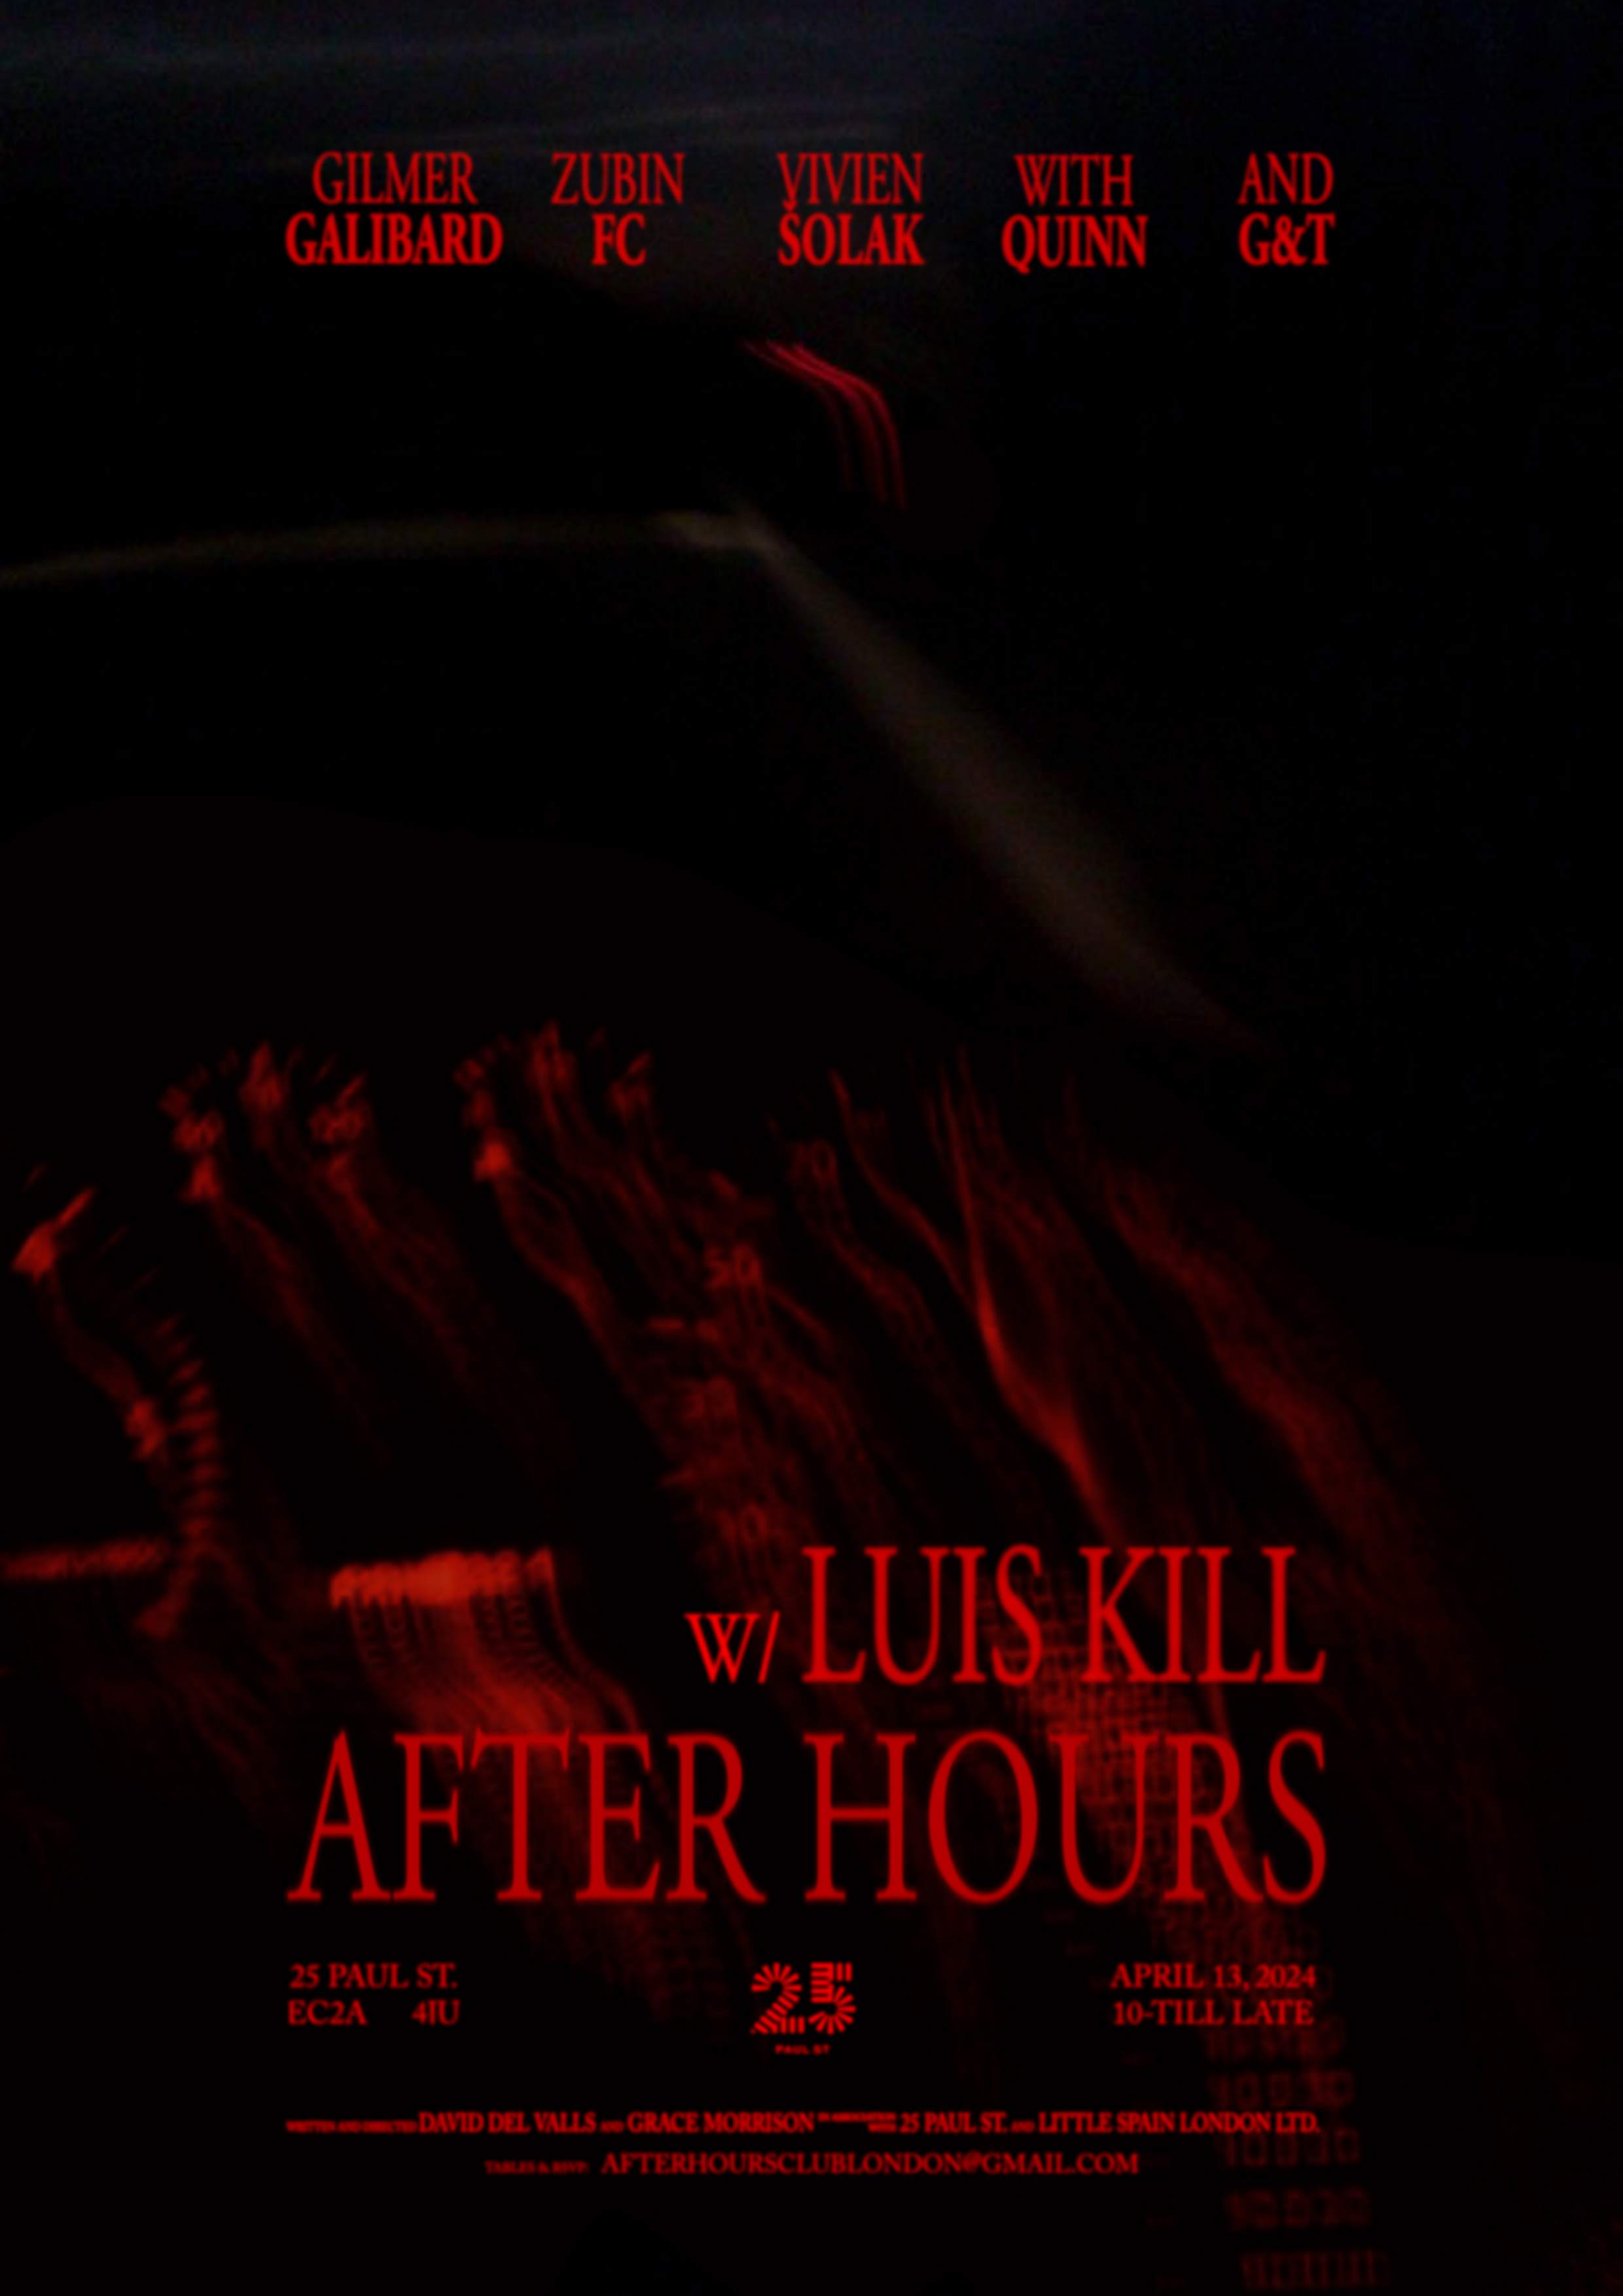 After Hours - フライヤー表